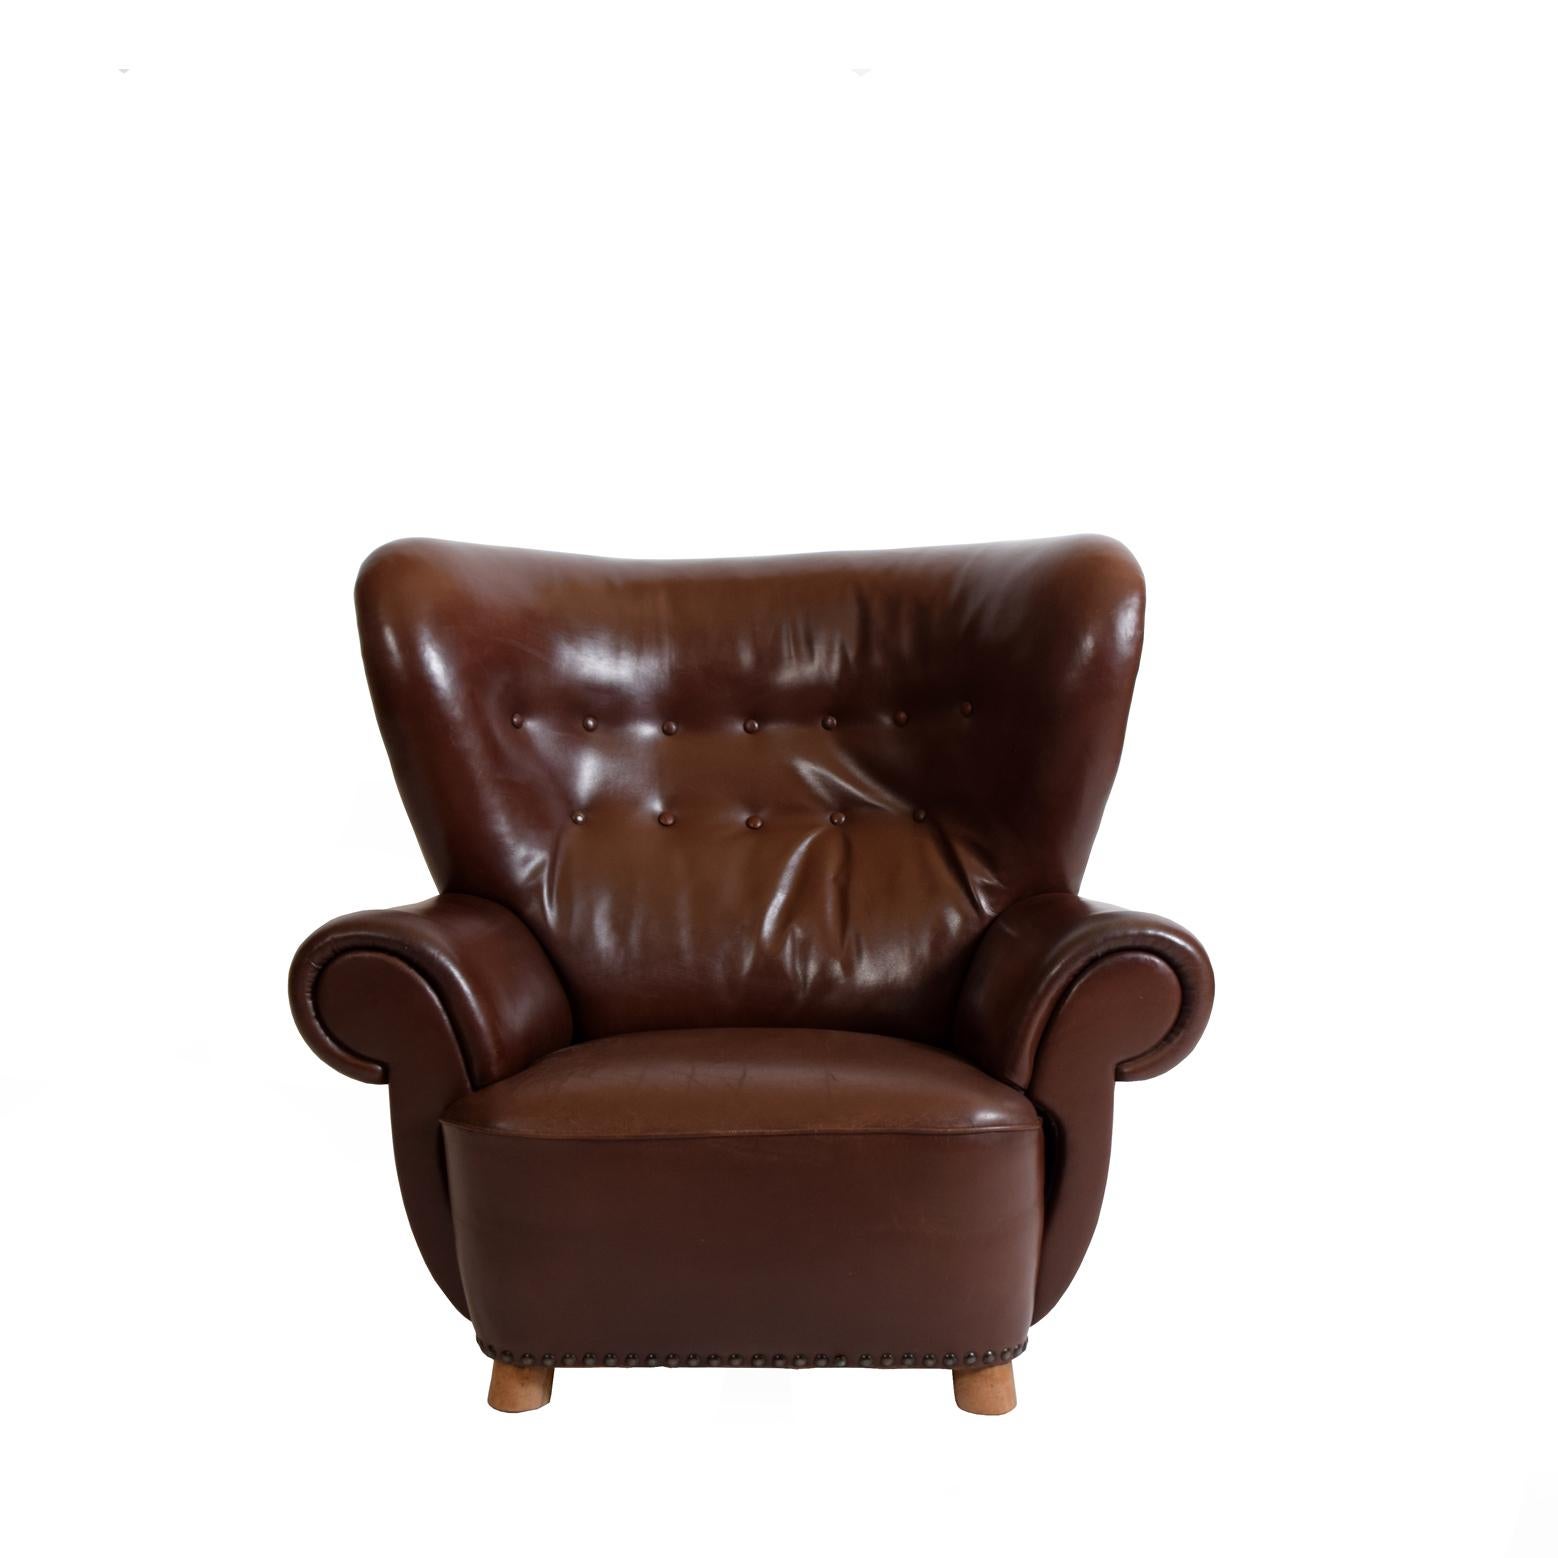 Mid-20th Century Large Leather Club Chair  For Sale